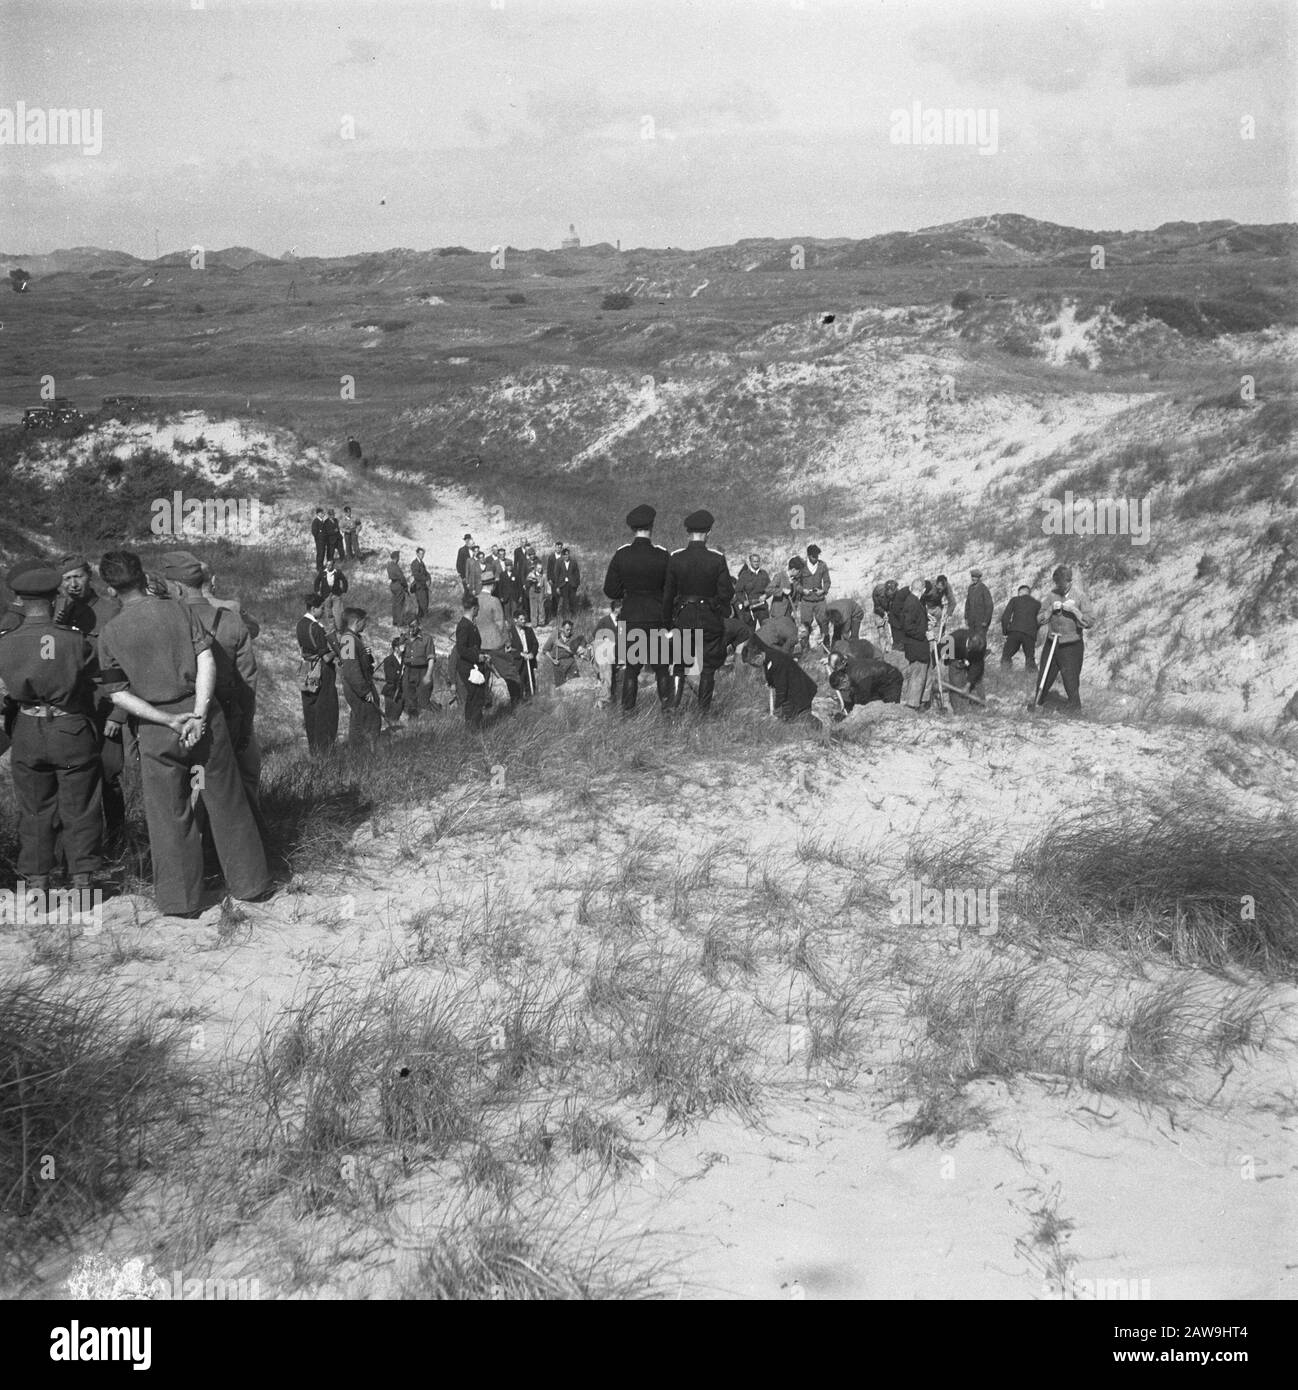 Mass Grave to Waalsdorp  Mass Grave to Waalsdorp. German war criminals and Dutch collaborators give evidence where victims of their crimes are buried and do yourself excavating. Dutch police monitors. Canadian soldiers watch Date: August 1945 Location: Waalsdorp, South Holland Keywords: mass graves, ruins, World War II Stock Photo